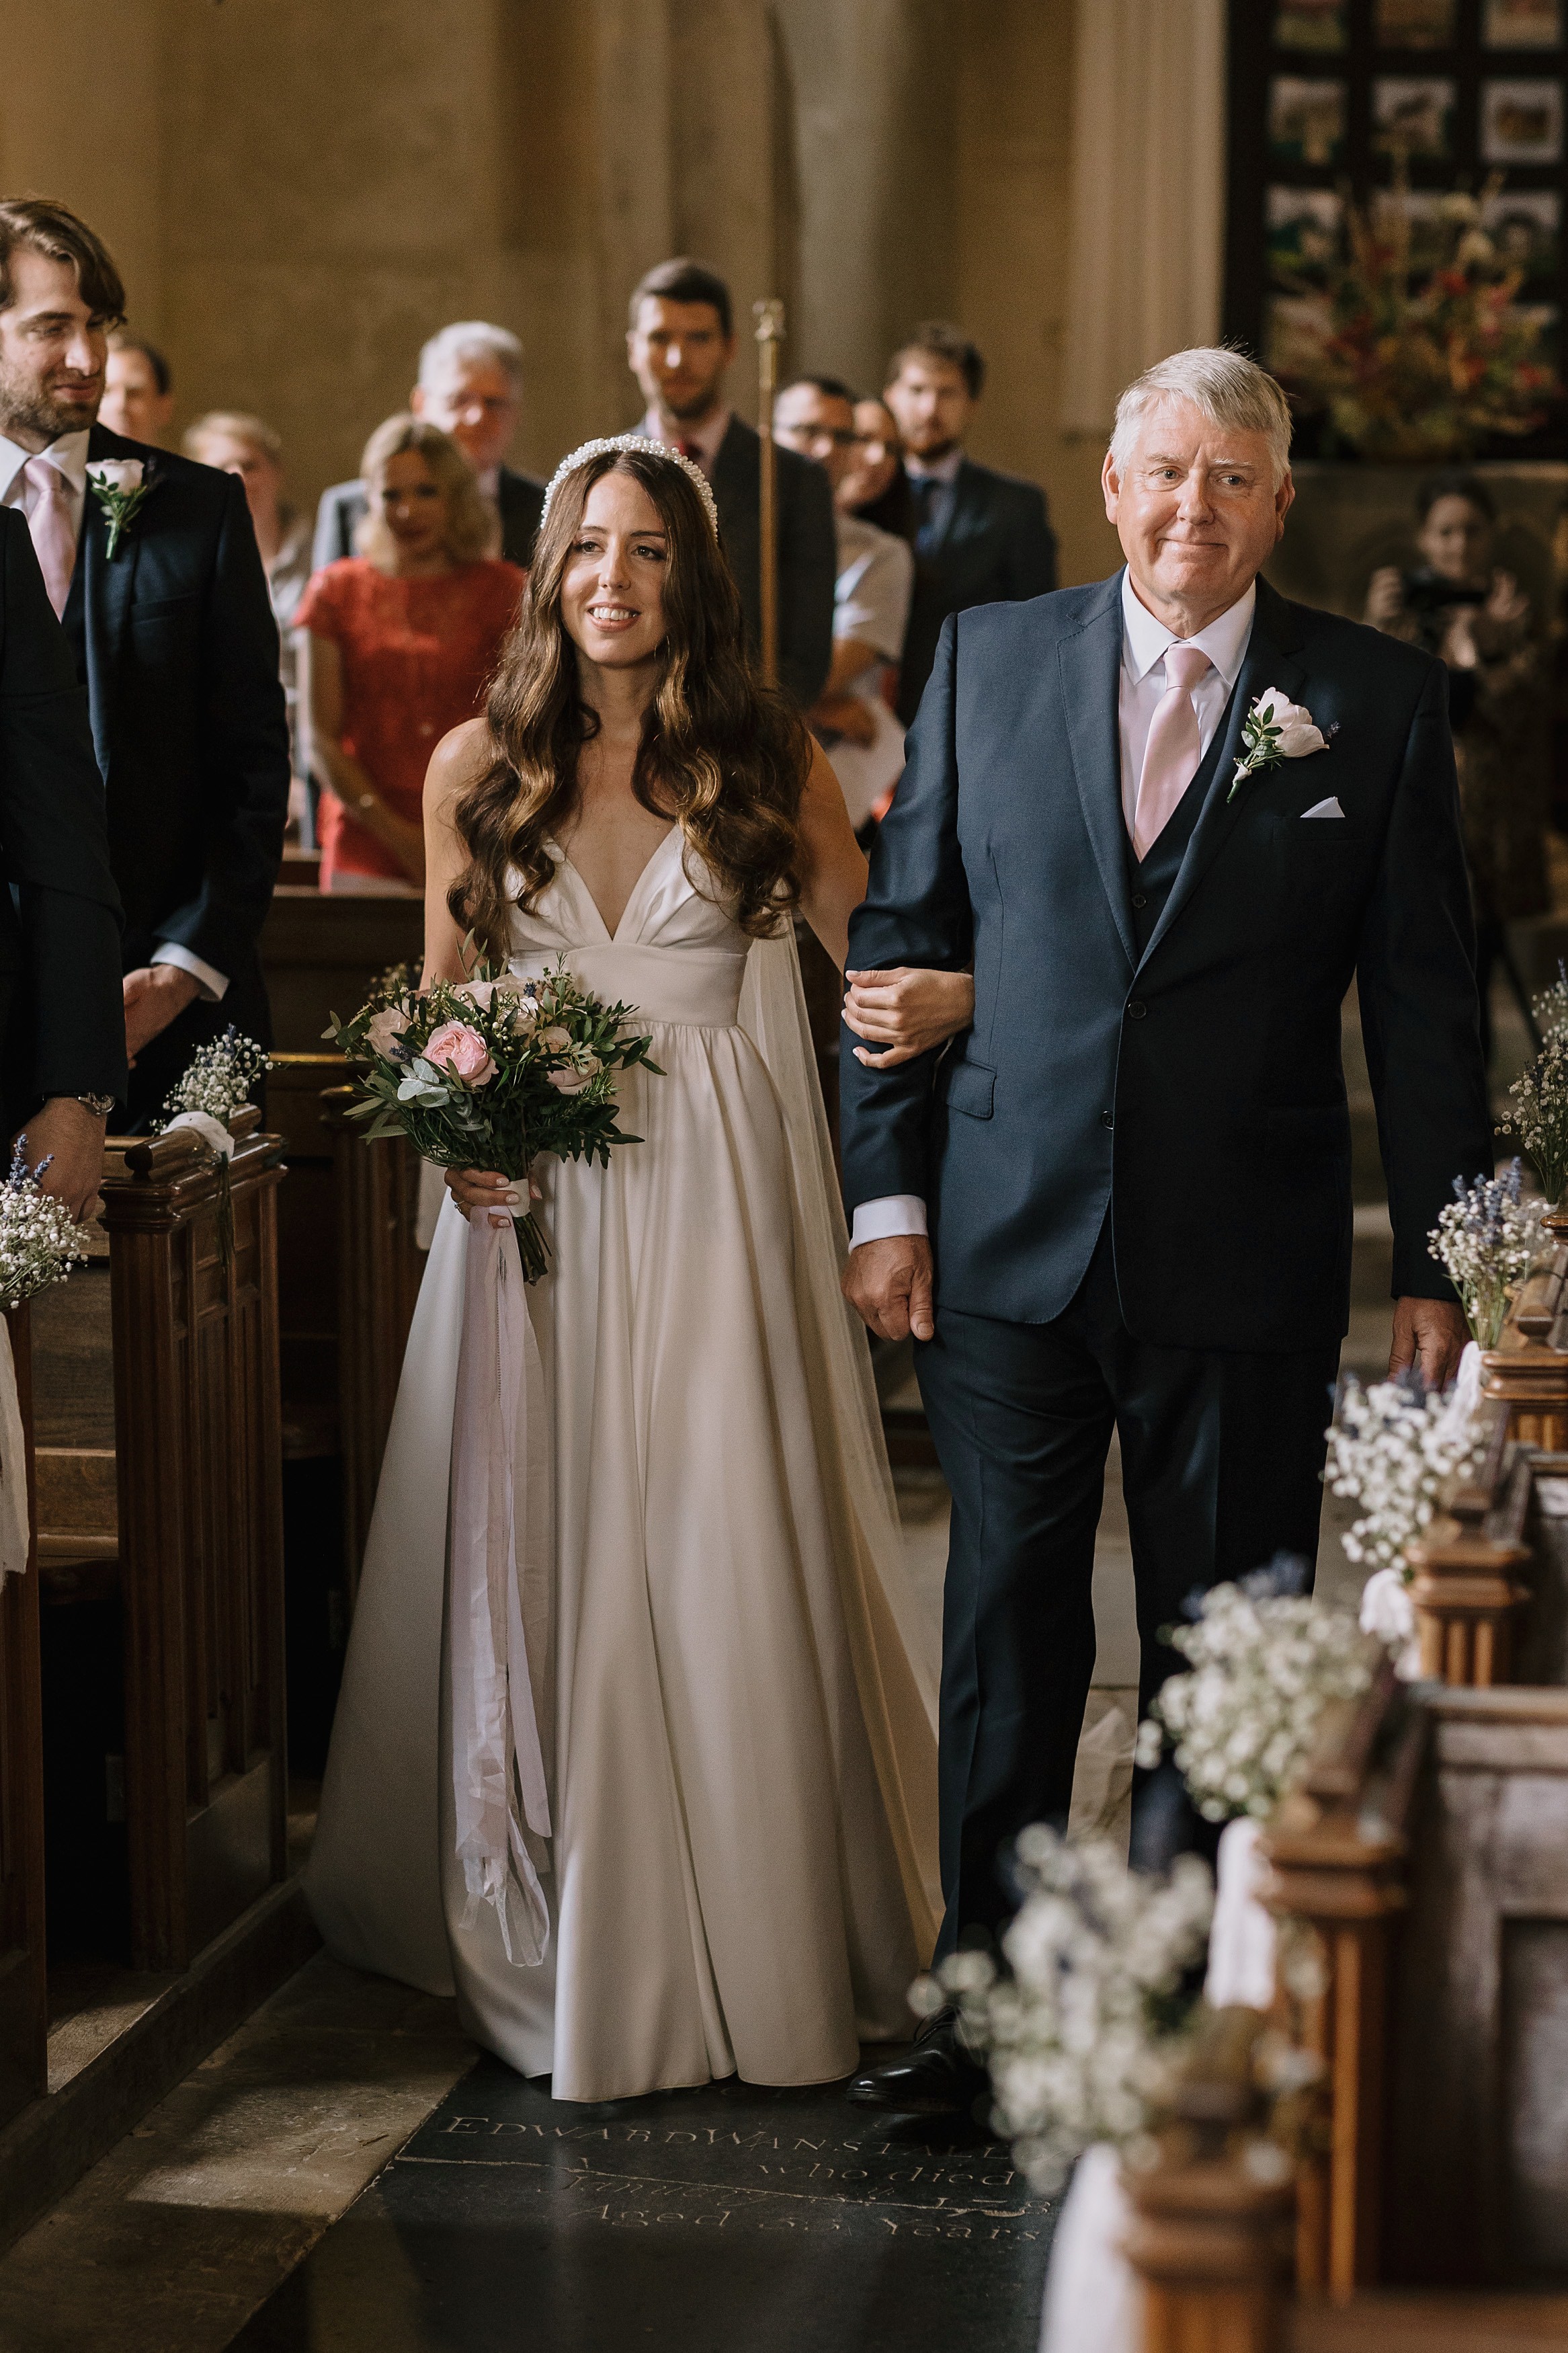 A bride walking down the isle holding flowers with the father of the bride